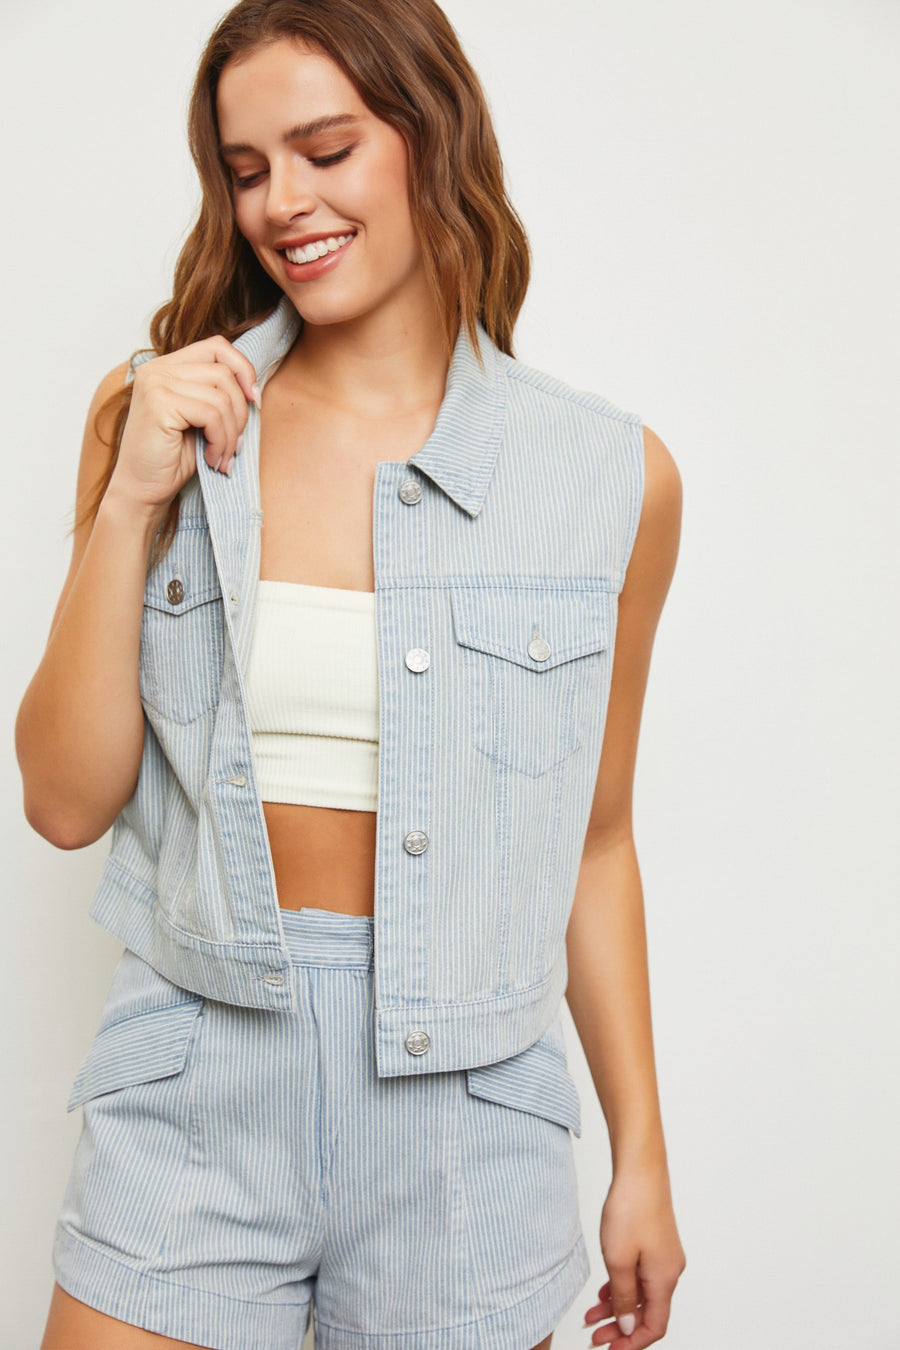 Featuring a stripped button up denim vest with two front pockets in the shade light denim